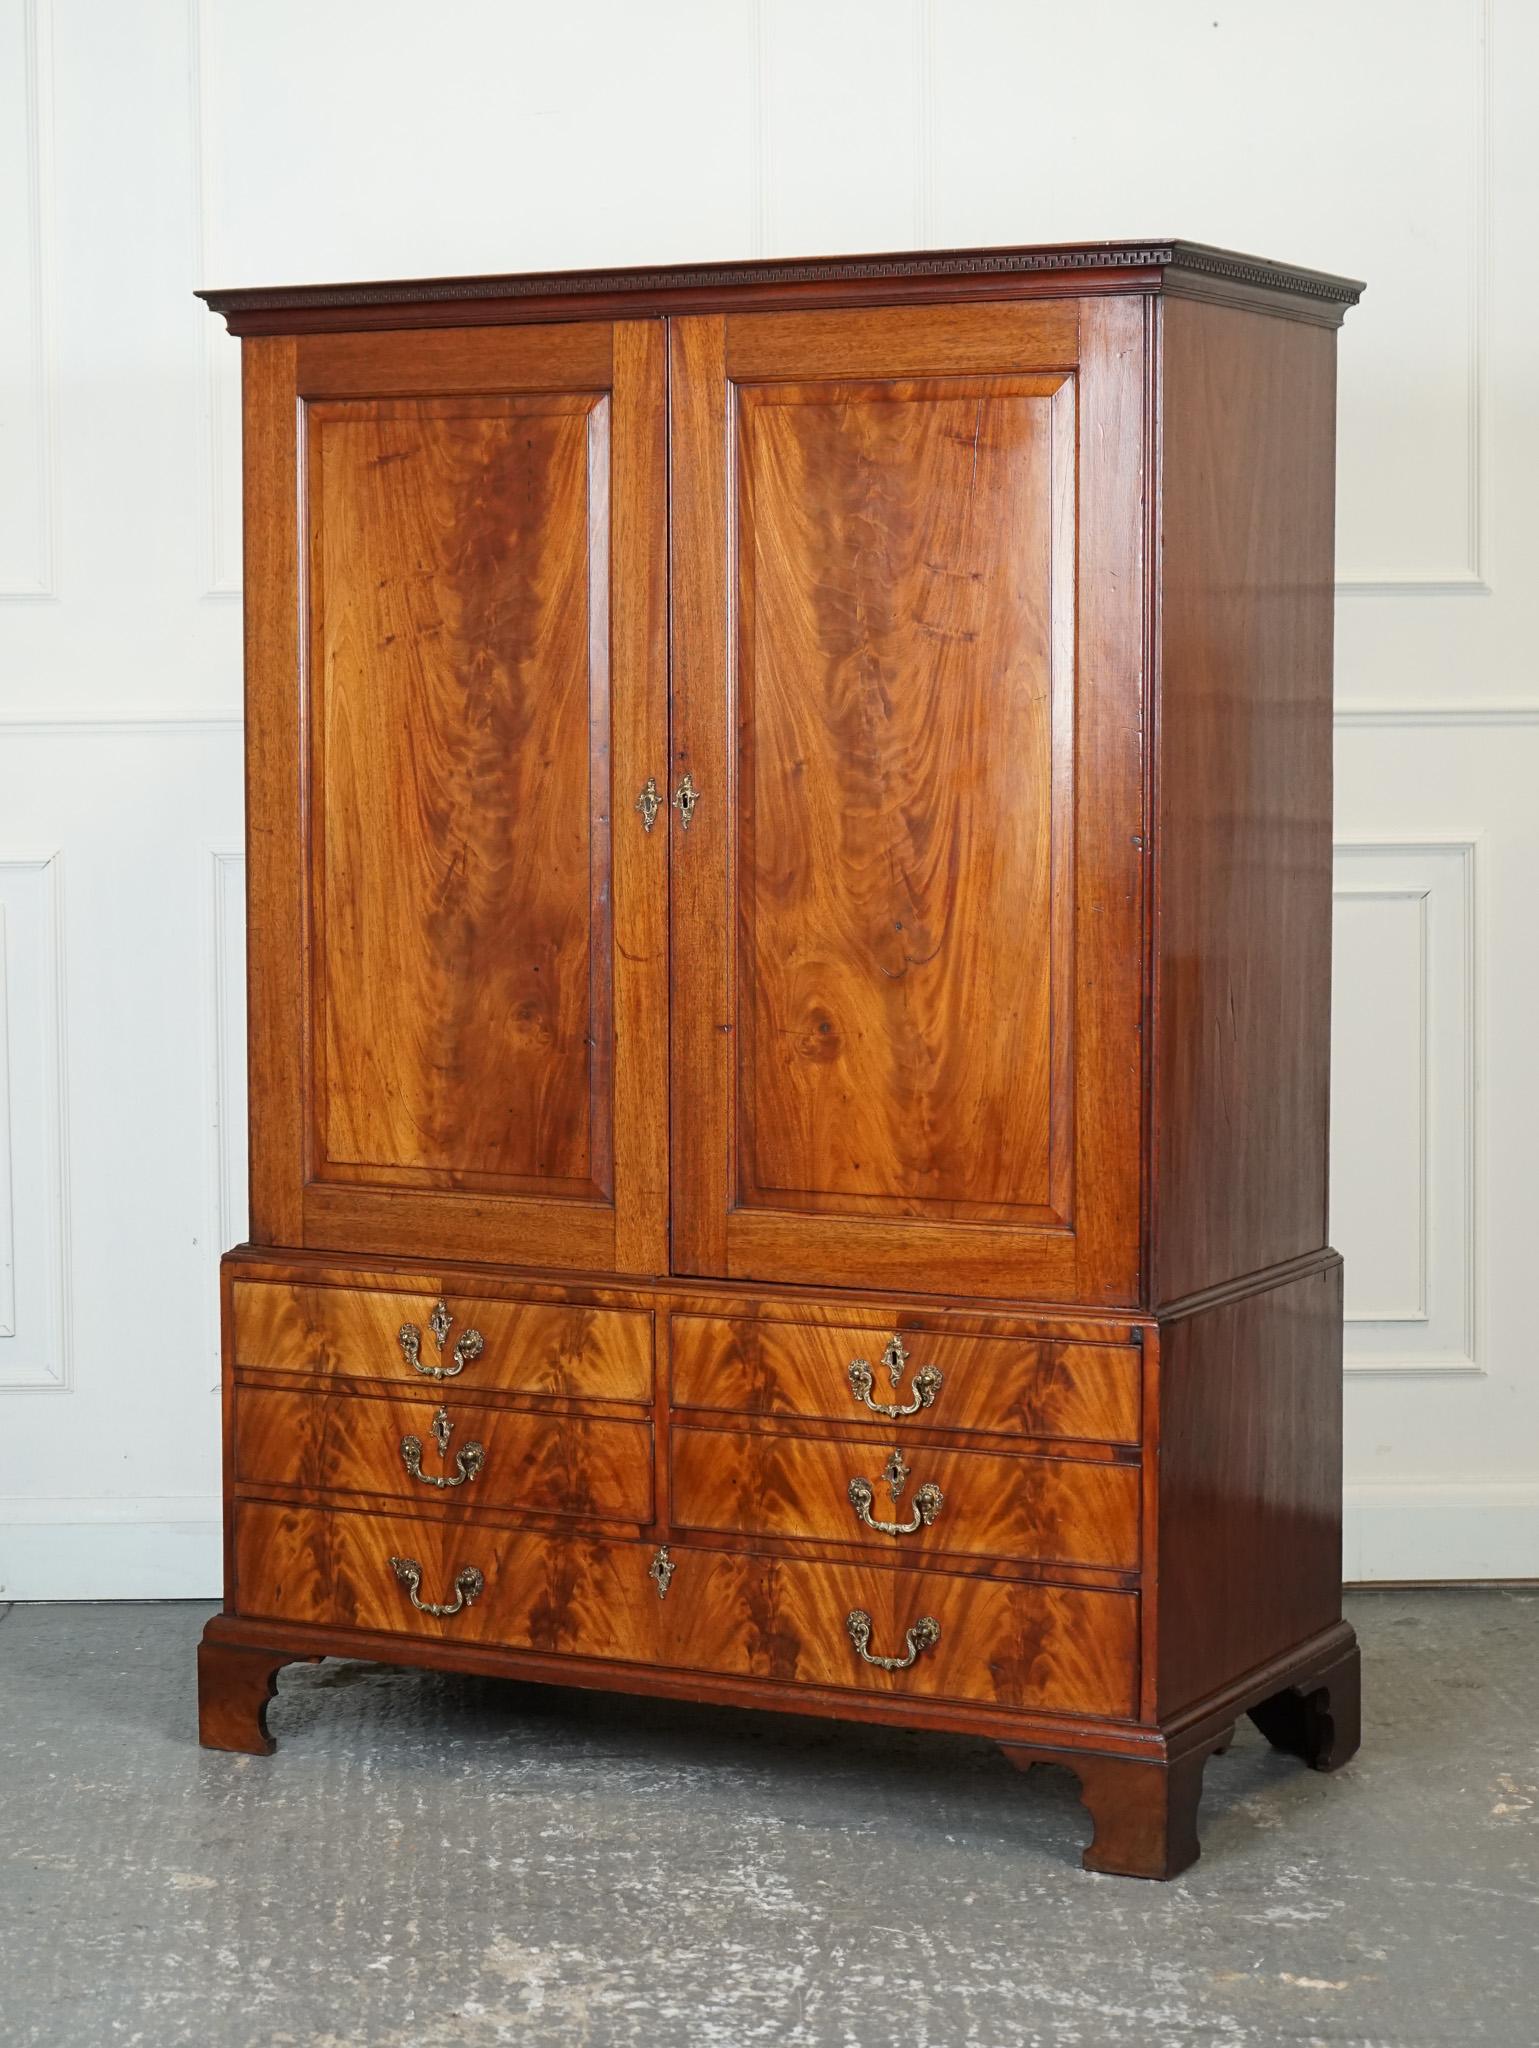 

We are delighted to offer for sale this 1800 Antique Georgian Linen Press Wardrobe.

The 1800 Antique English Georgian Flamed Hardwood Linen Press Wardrobe Armoire is a luxurious and elegant piece of furniture with a rich history and exquisite